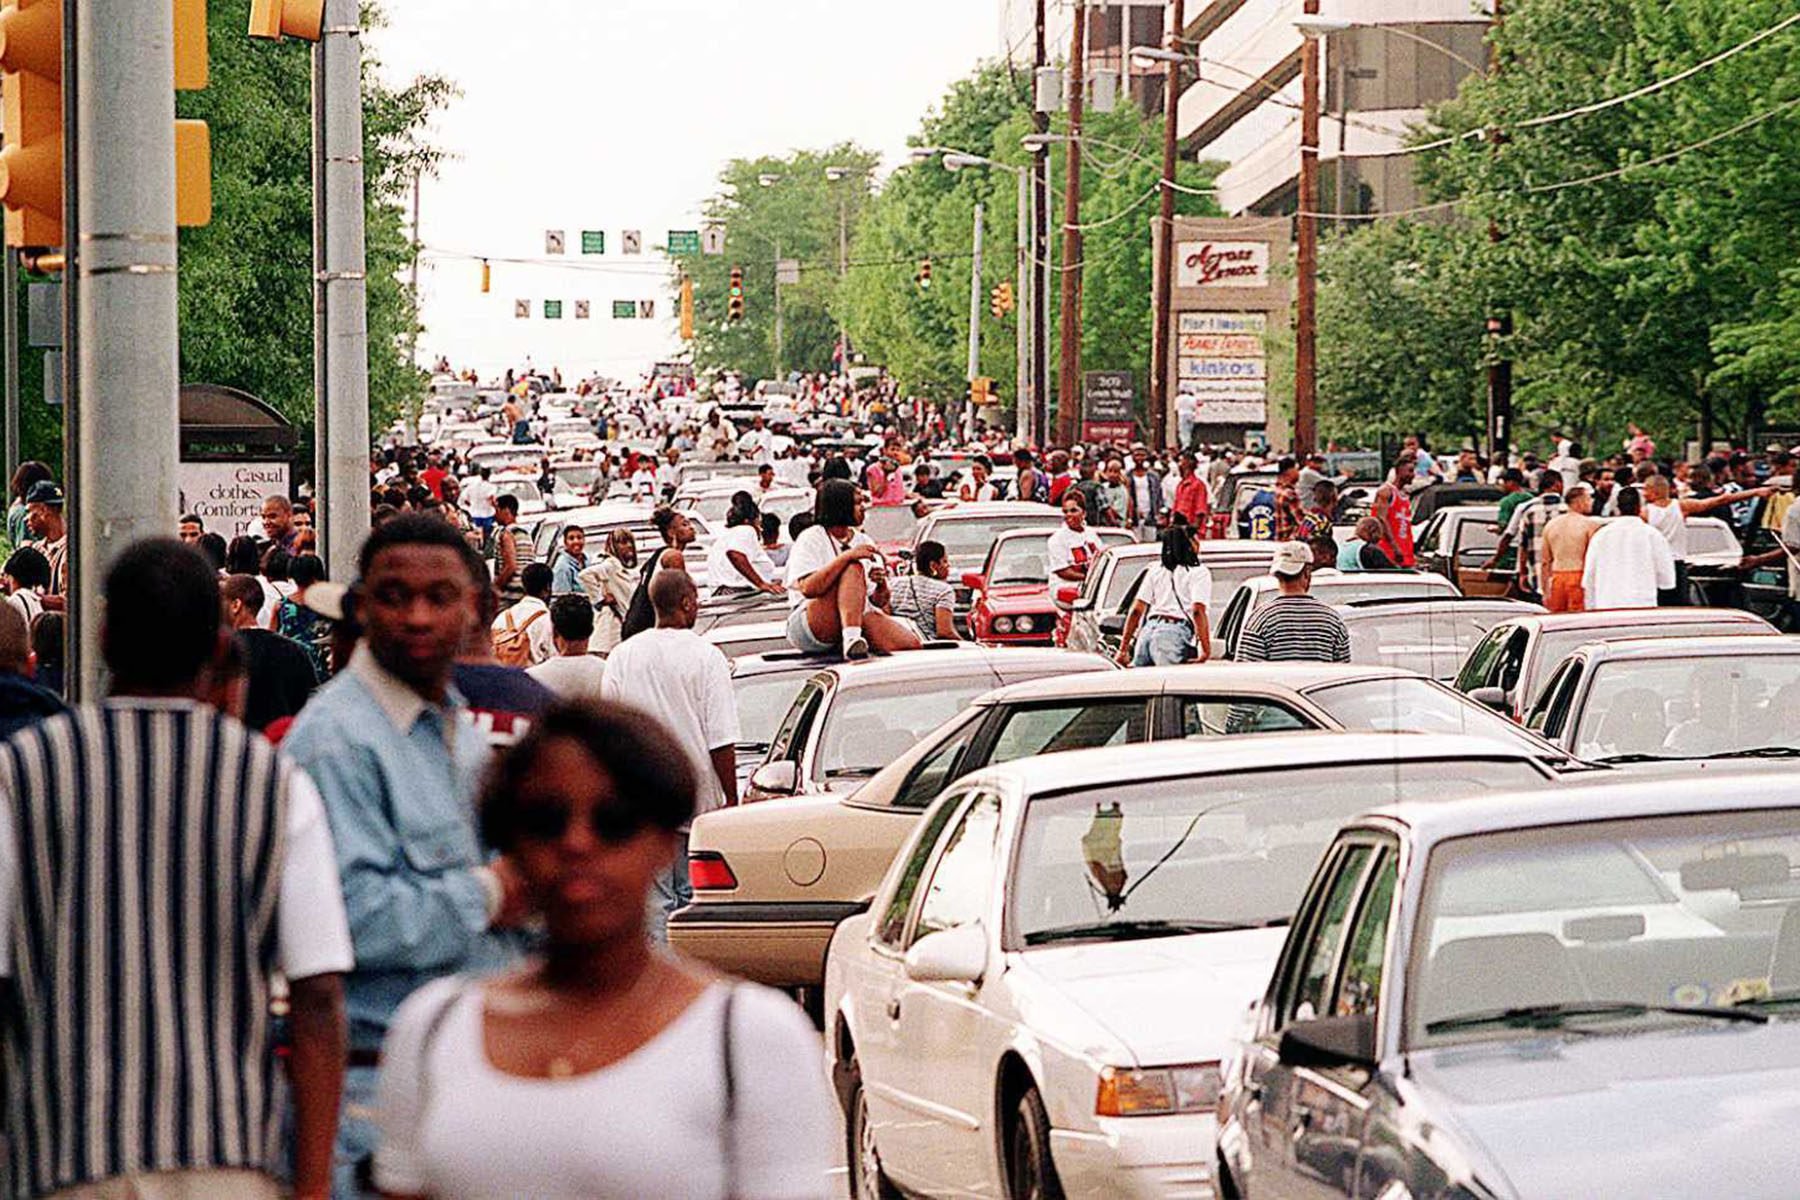 photo of gridlocked traffic with Freaknik participants walking throughout the streets.